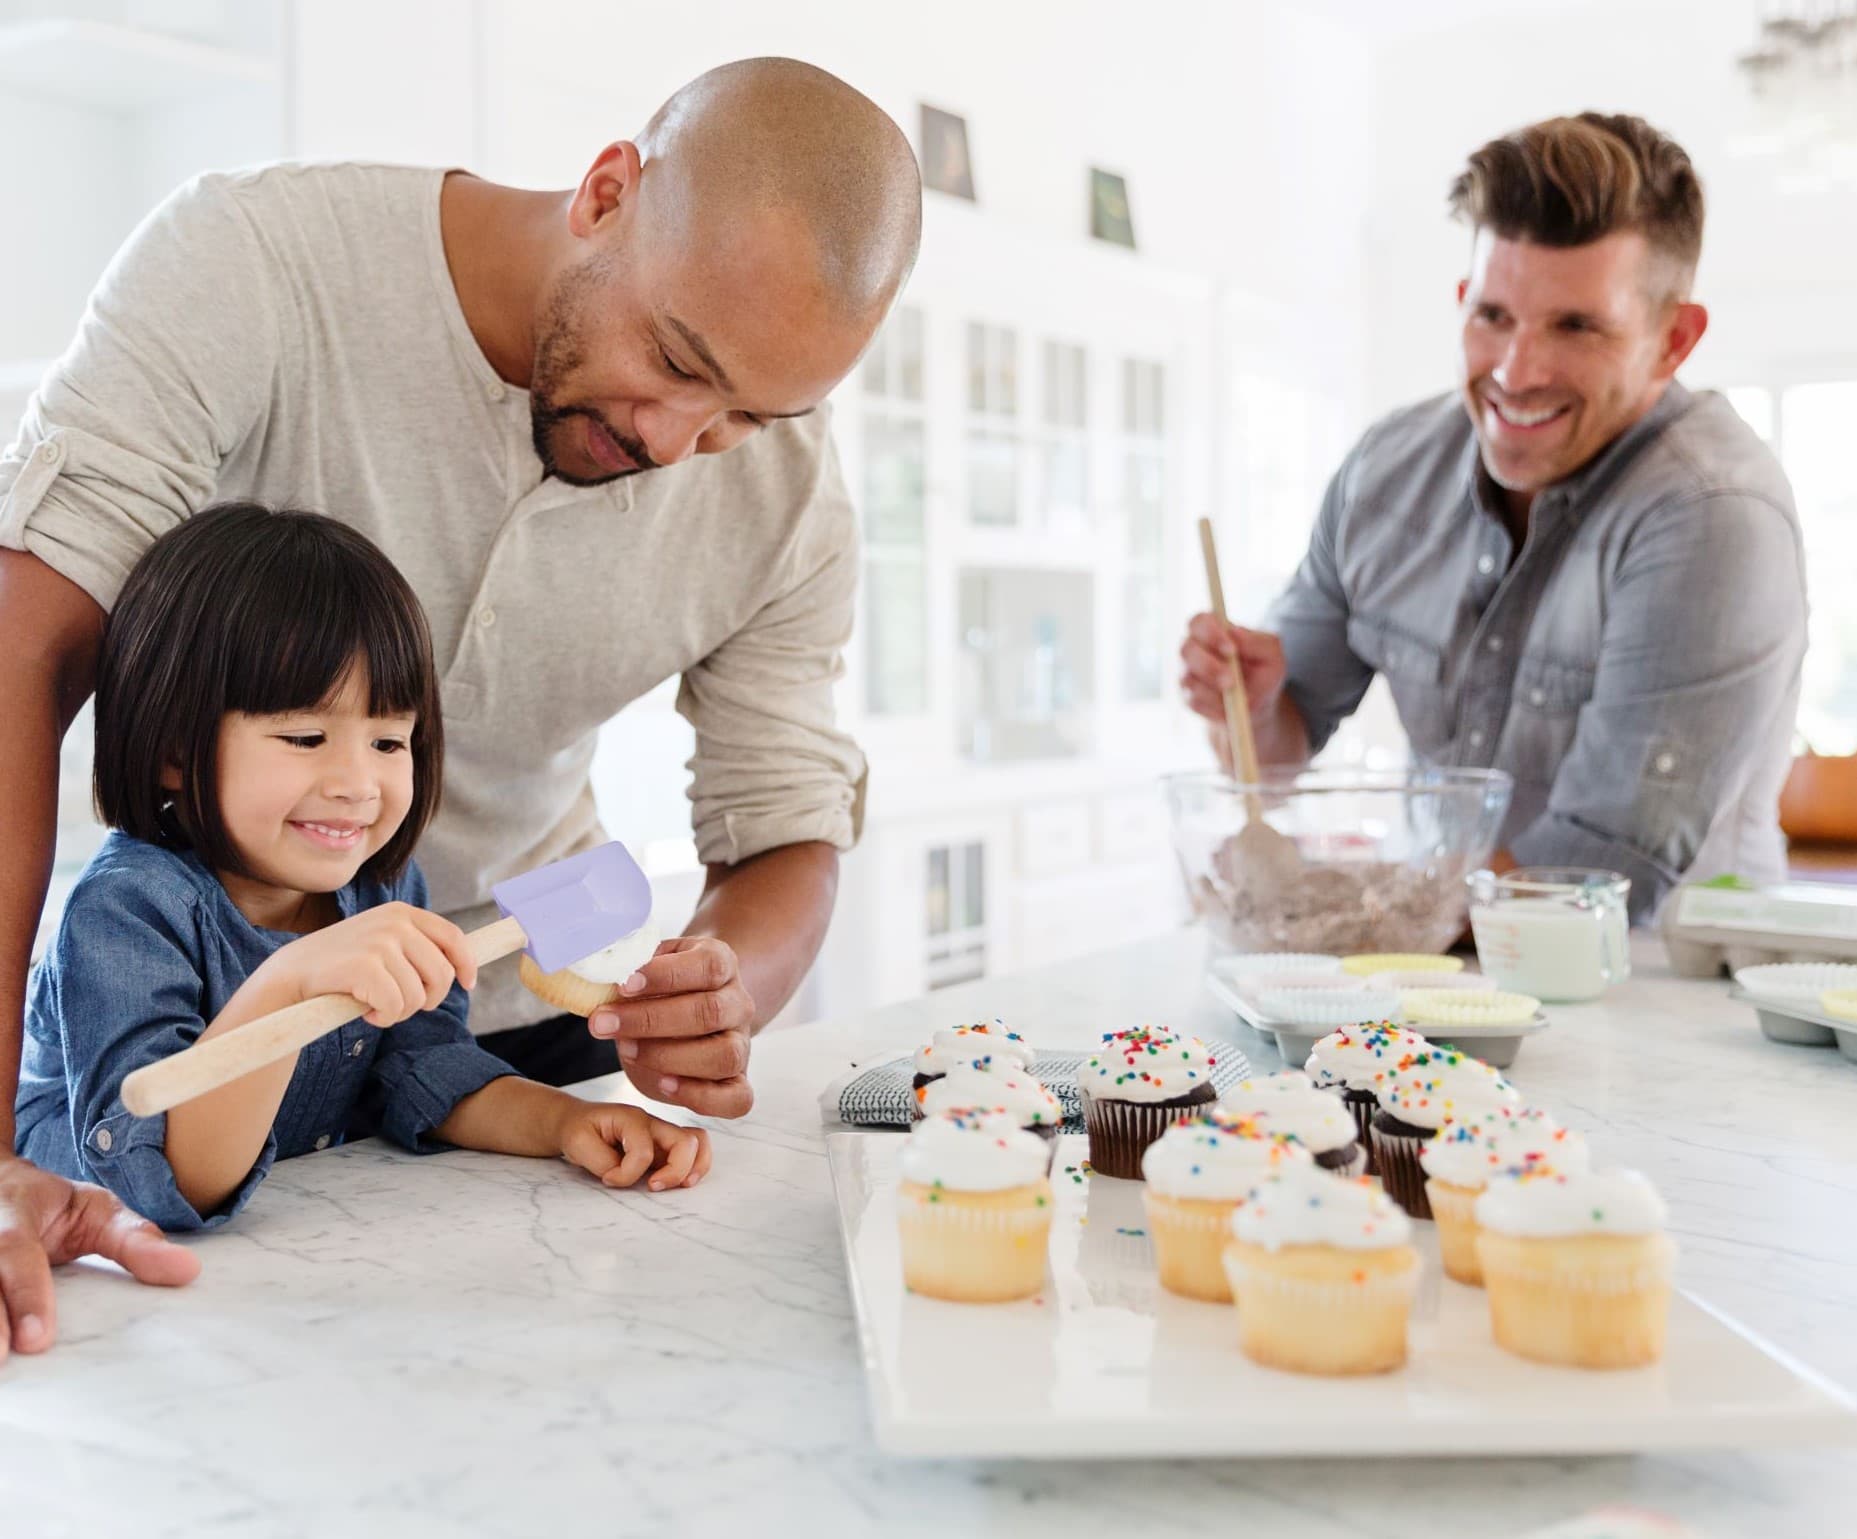 Two men bake cupcakes with a young girl.